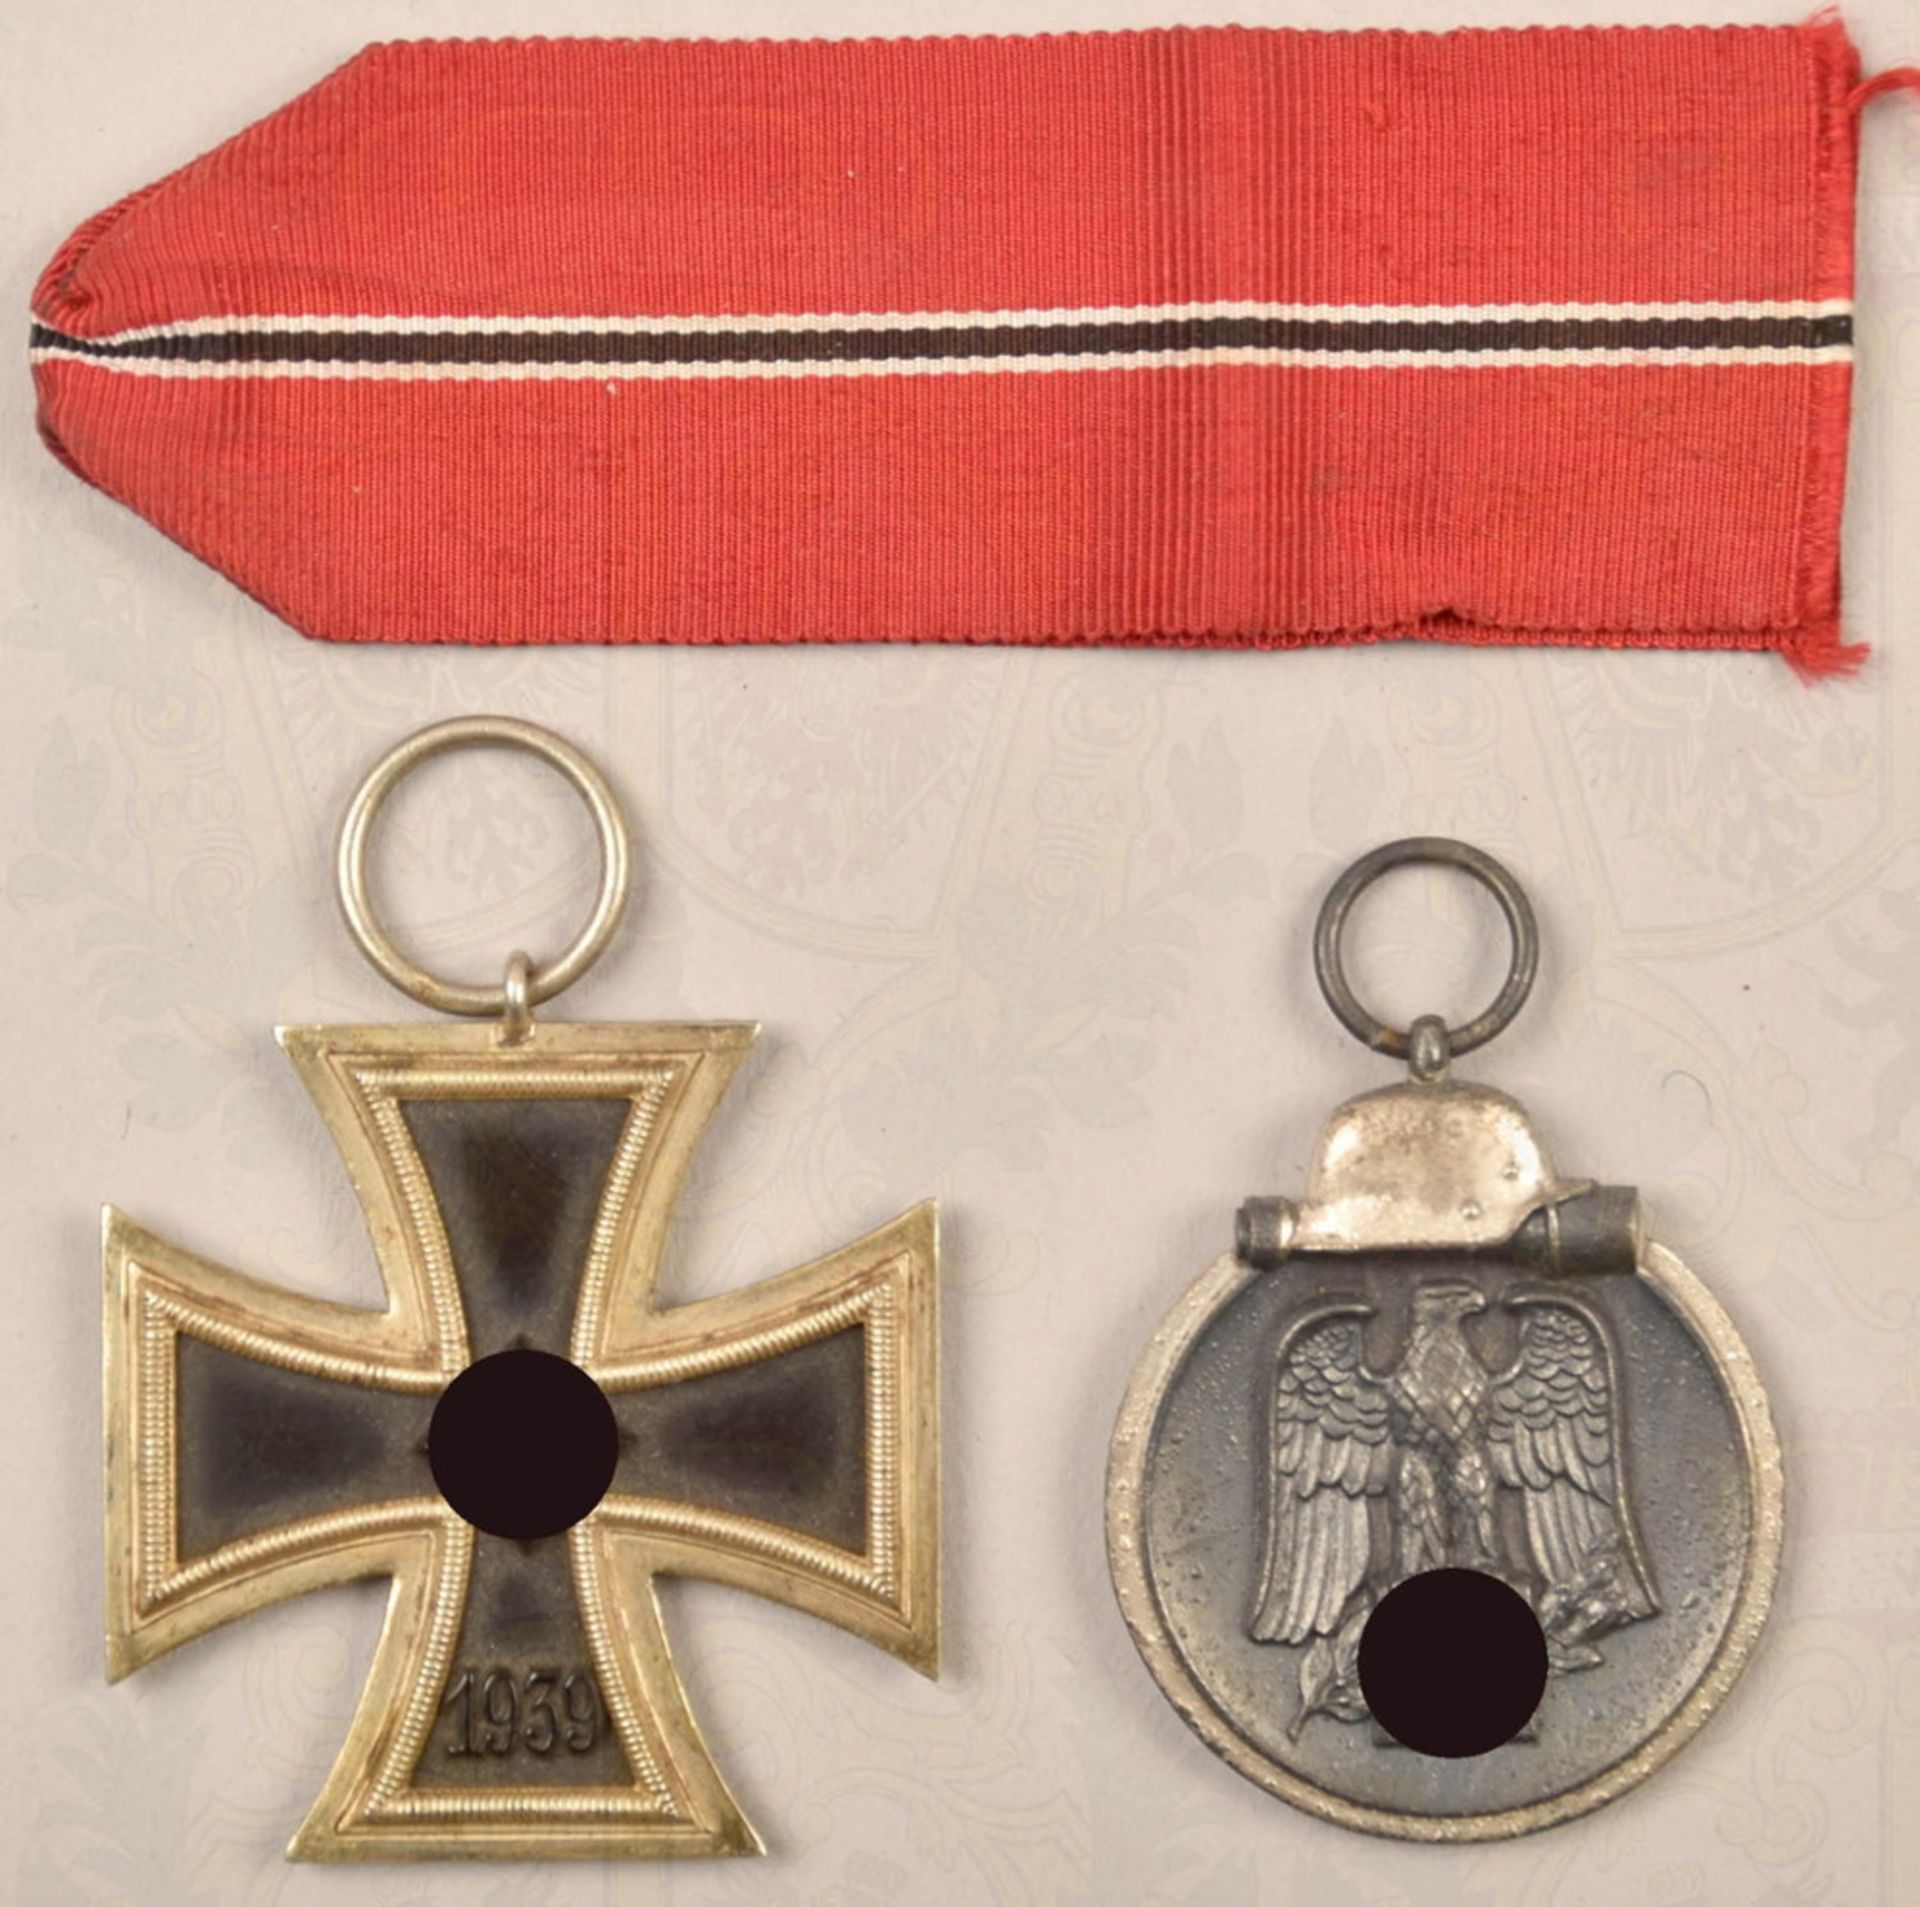 Iron Cross 2nd Class 1939 and Eastern Medal 1941